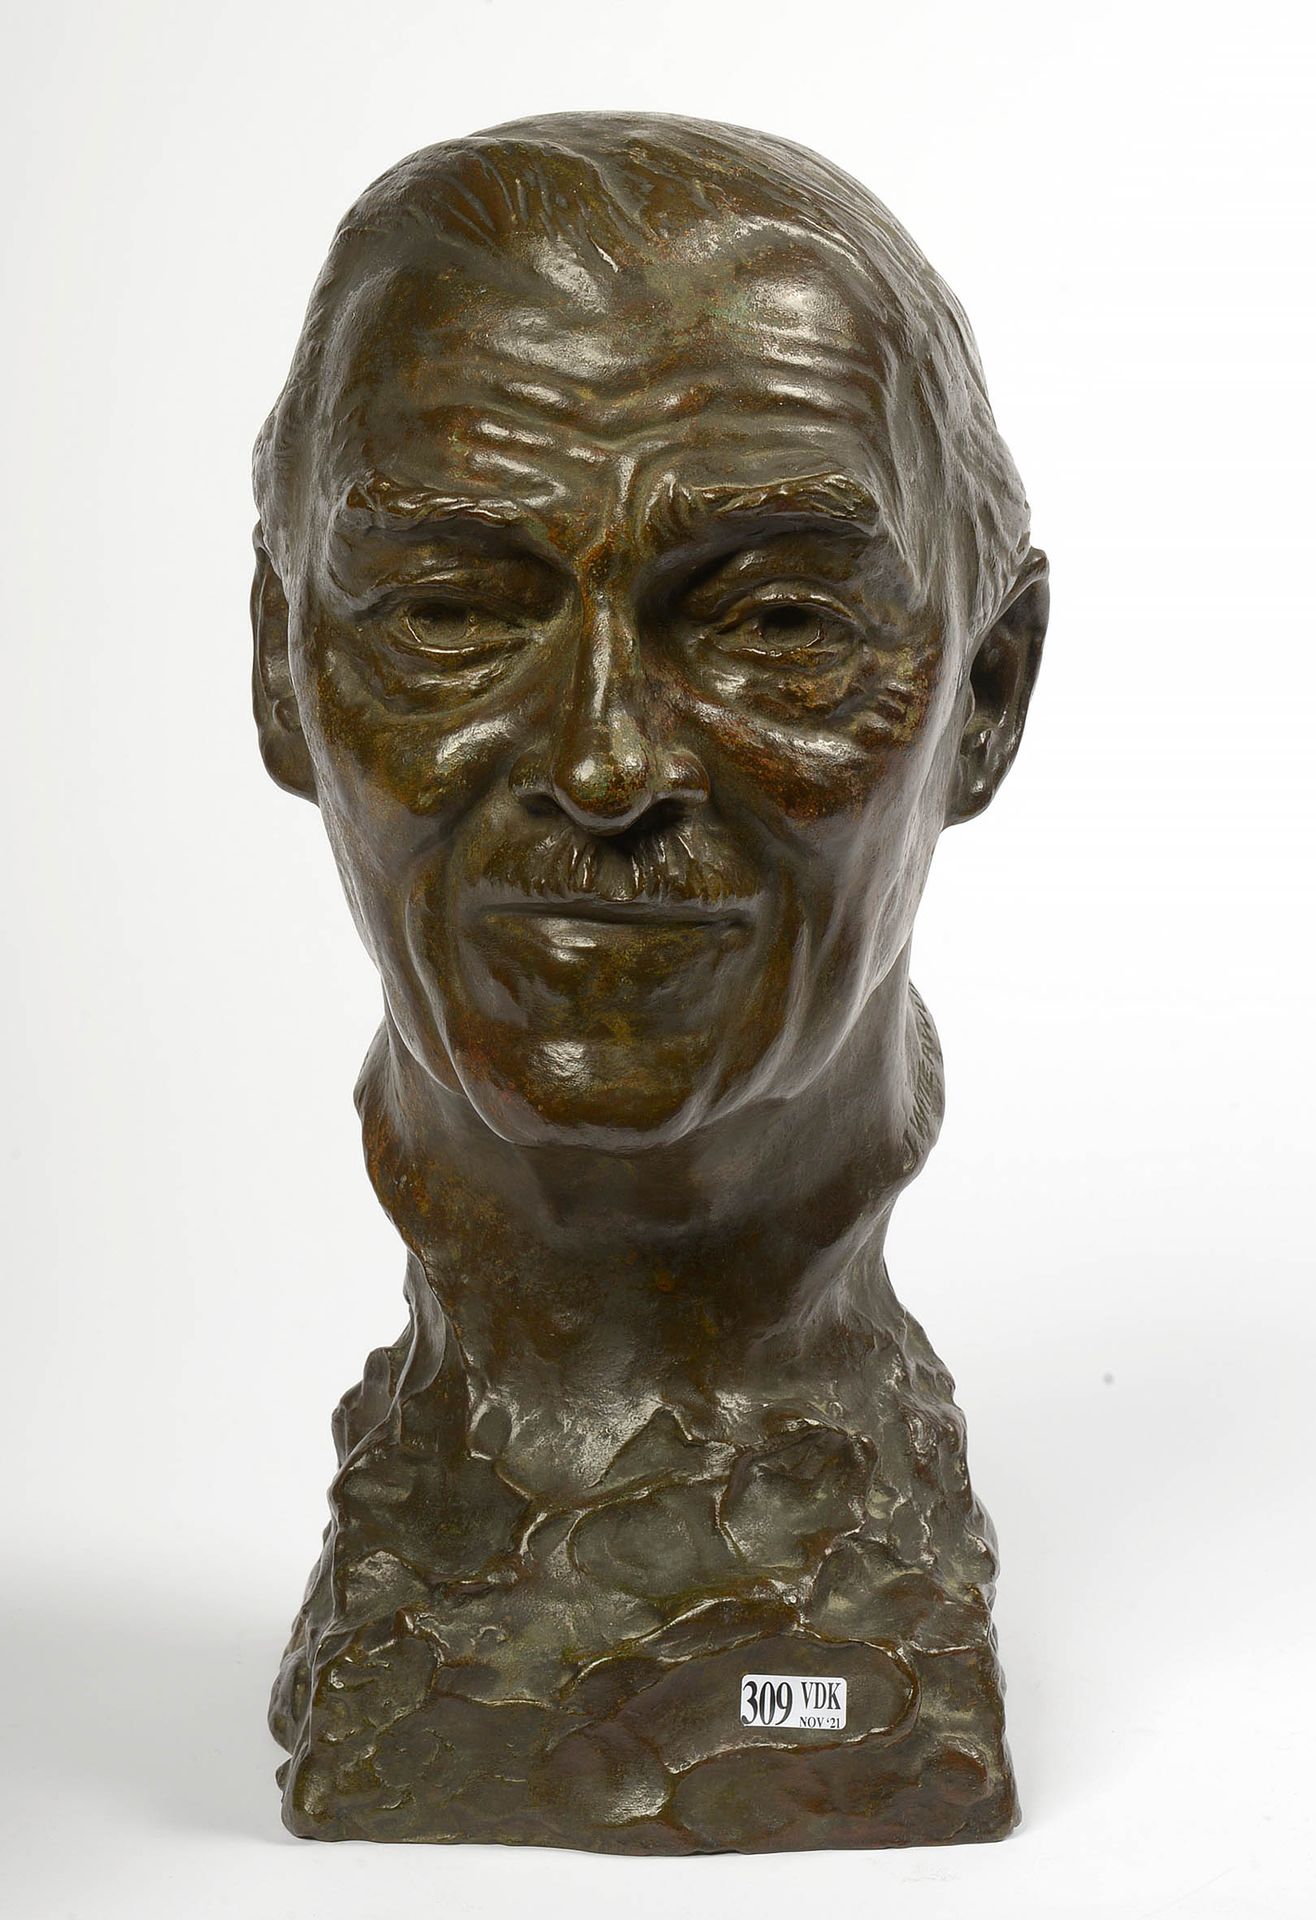 WITTERWULGHE Joseph (1883 - 1967) "Bust of a man" in bronze with brown patina. S&hellip;